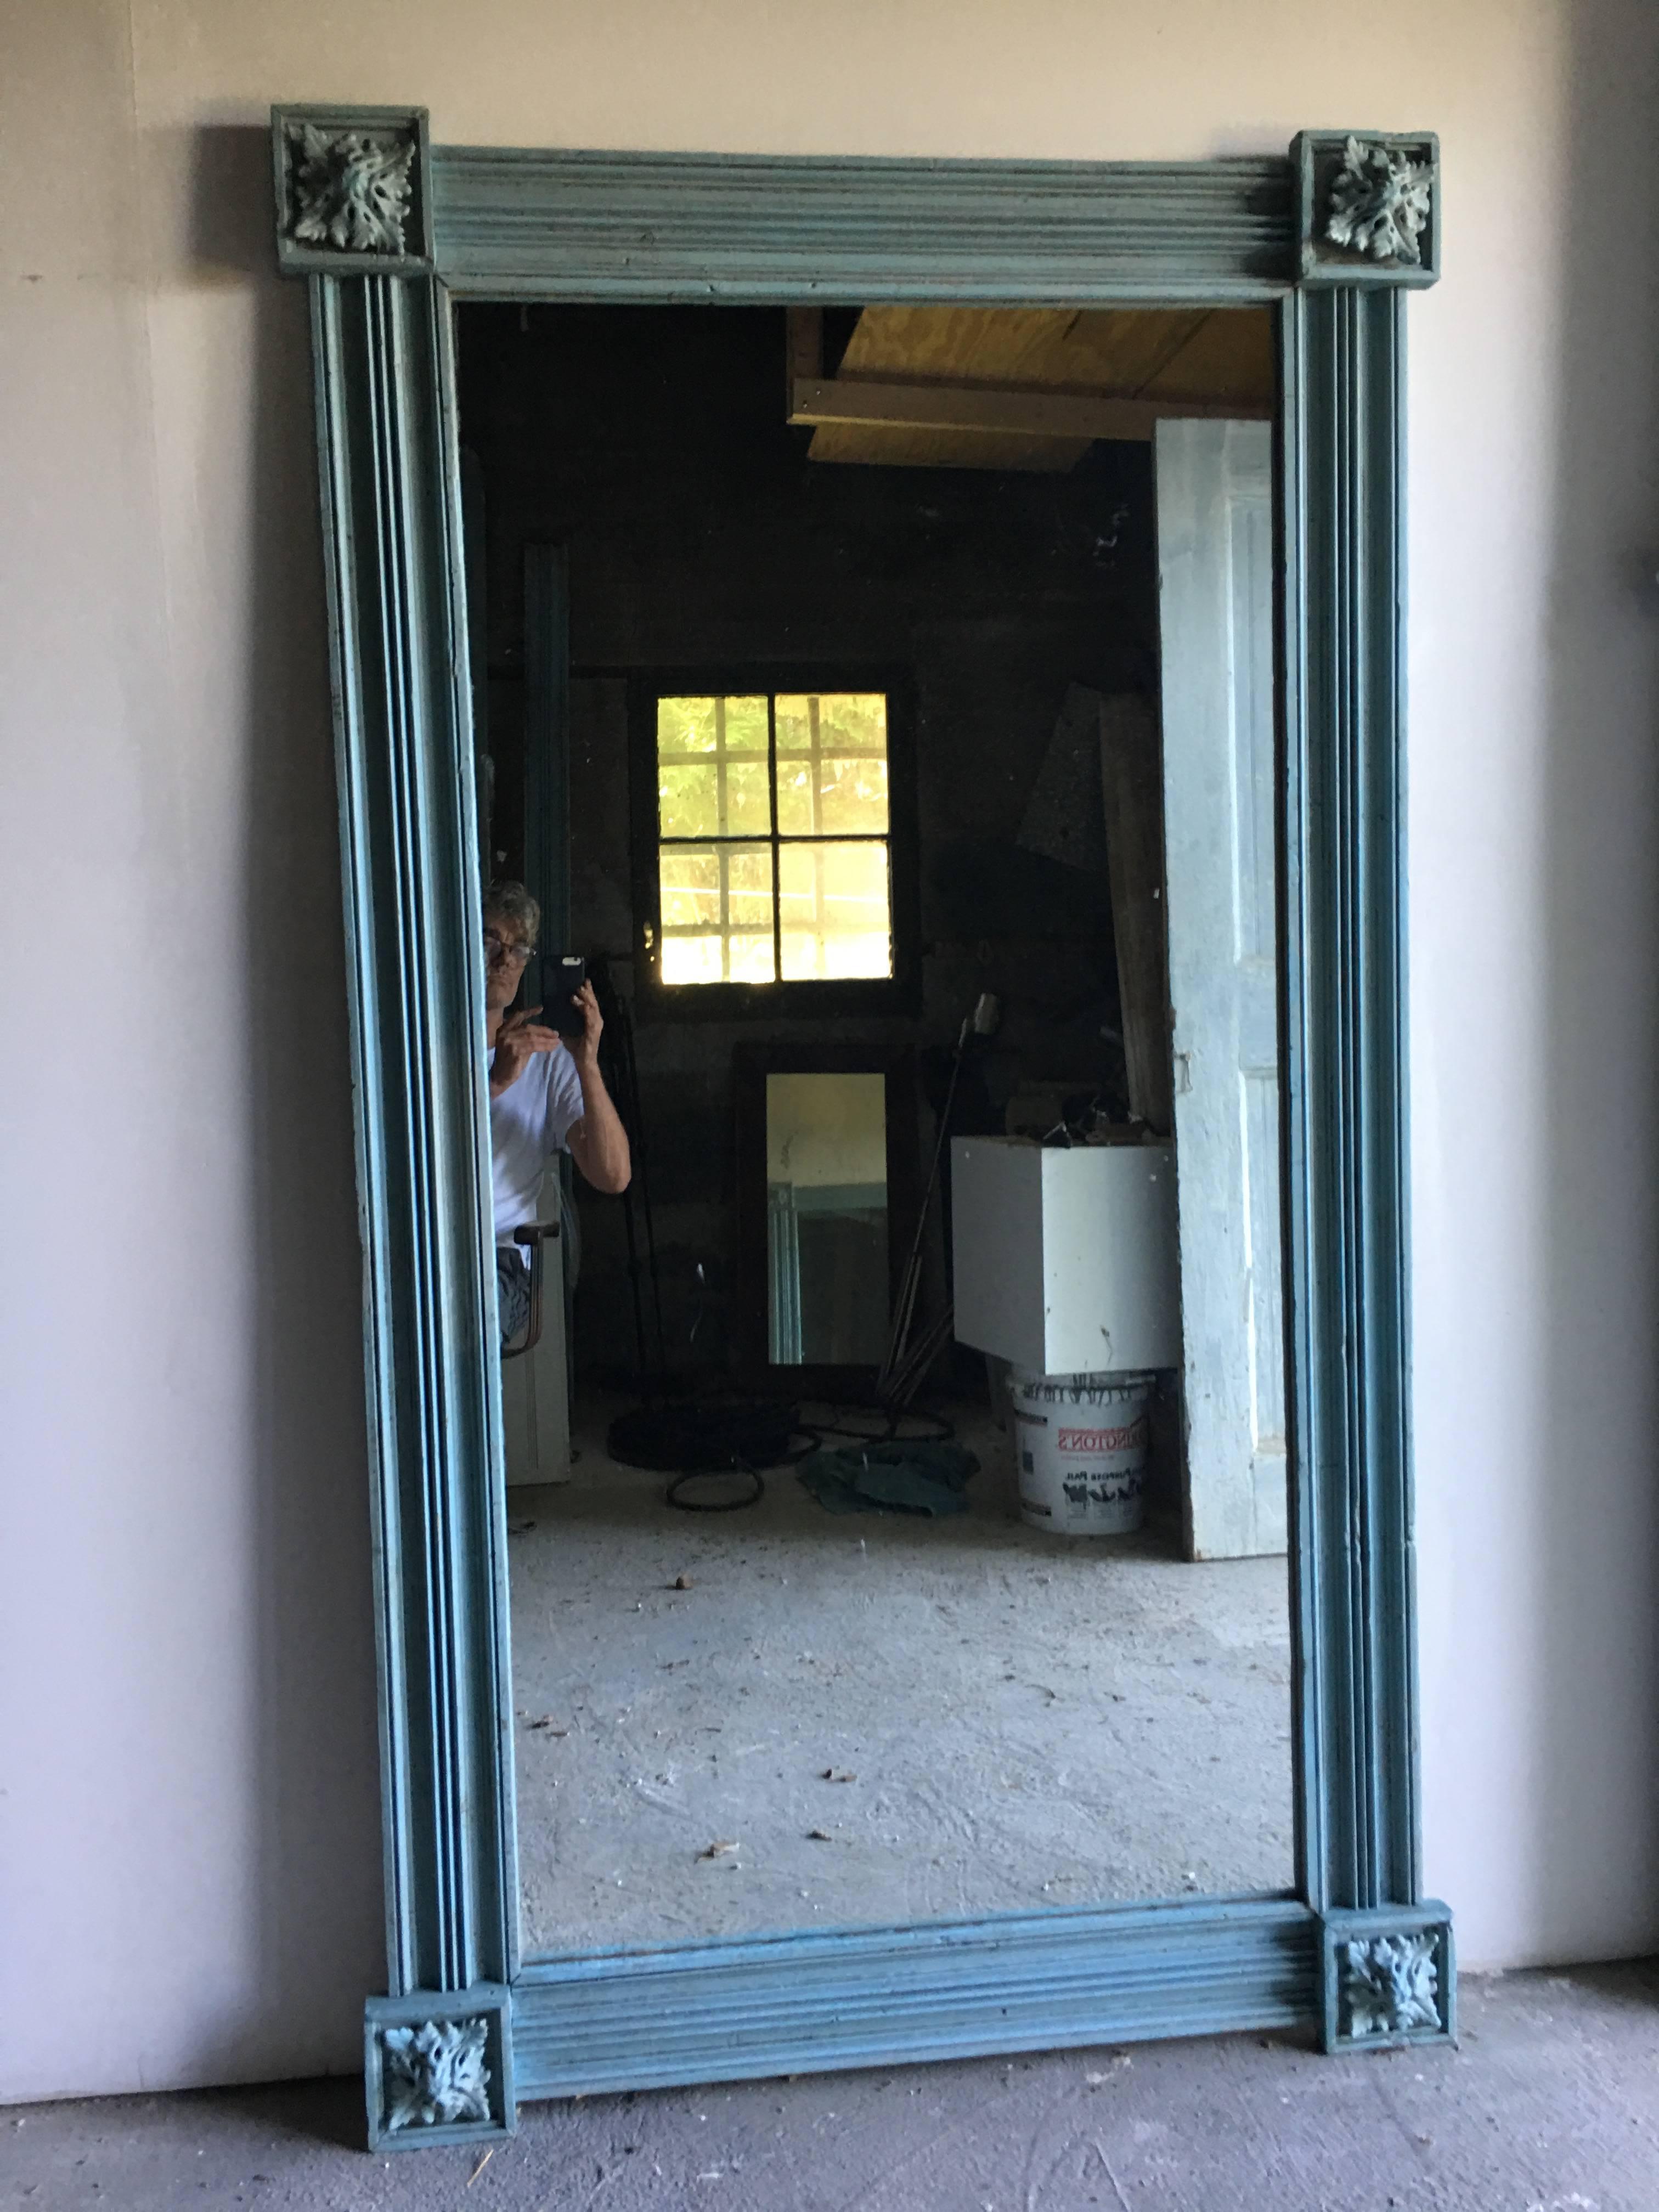 These mirrors were created from 19th molding saved from a houae in Newburgh NY.
Large in proportion. Original blue painted surfaace.